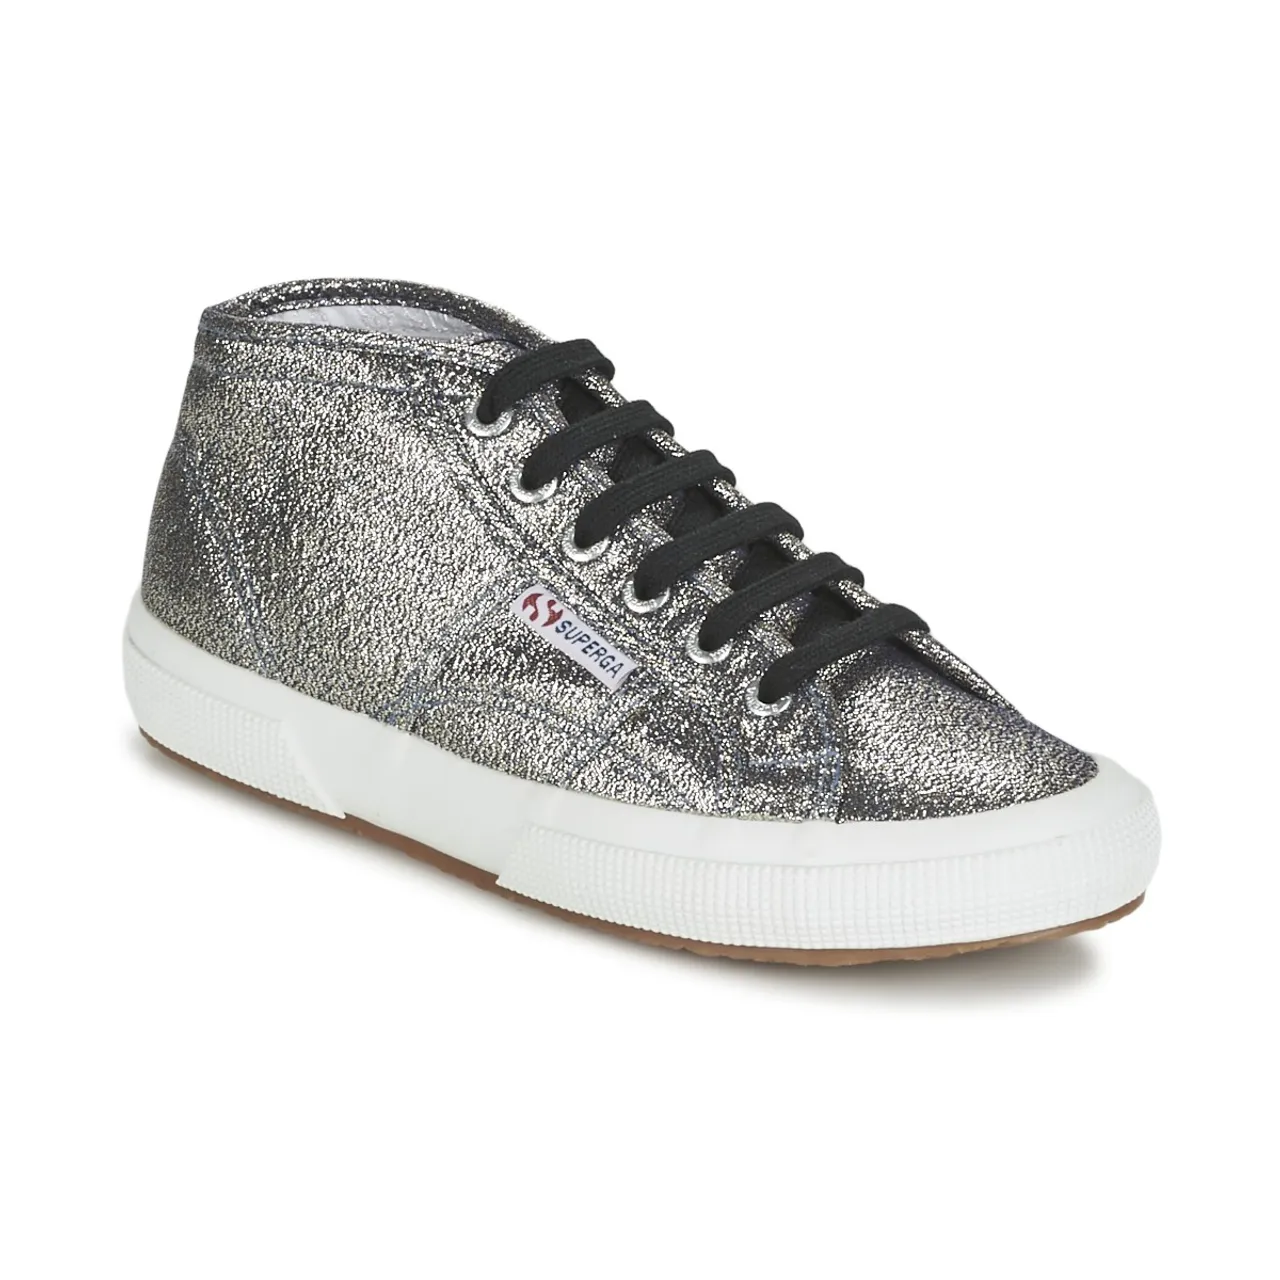 Superga  2754 LAMEW  women's Shoes (High-top Trainers) in Silver